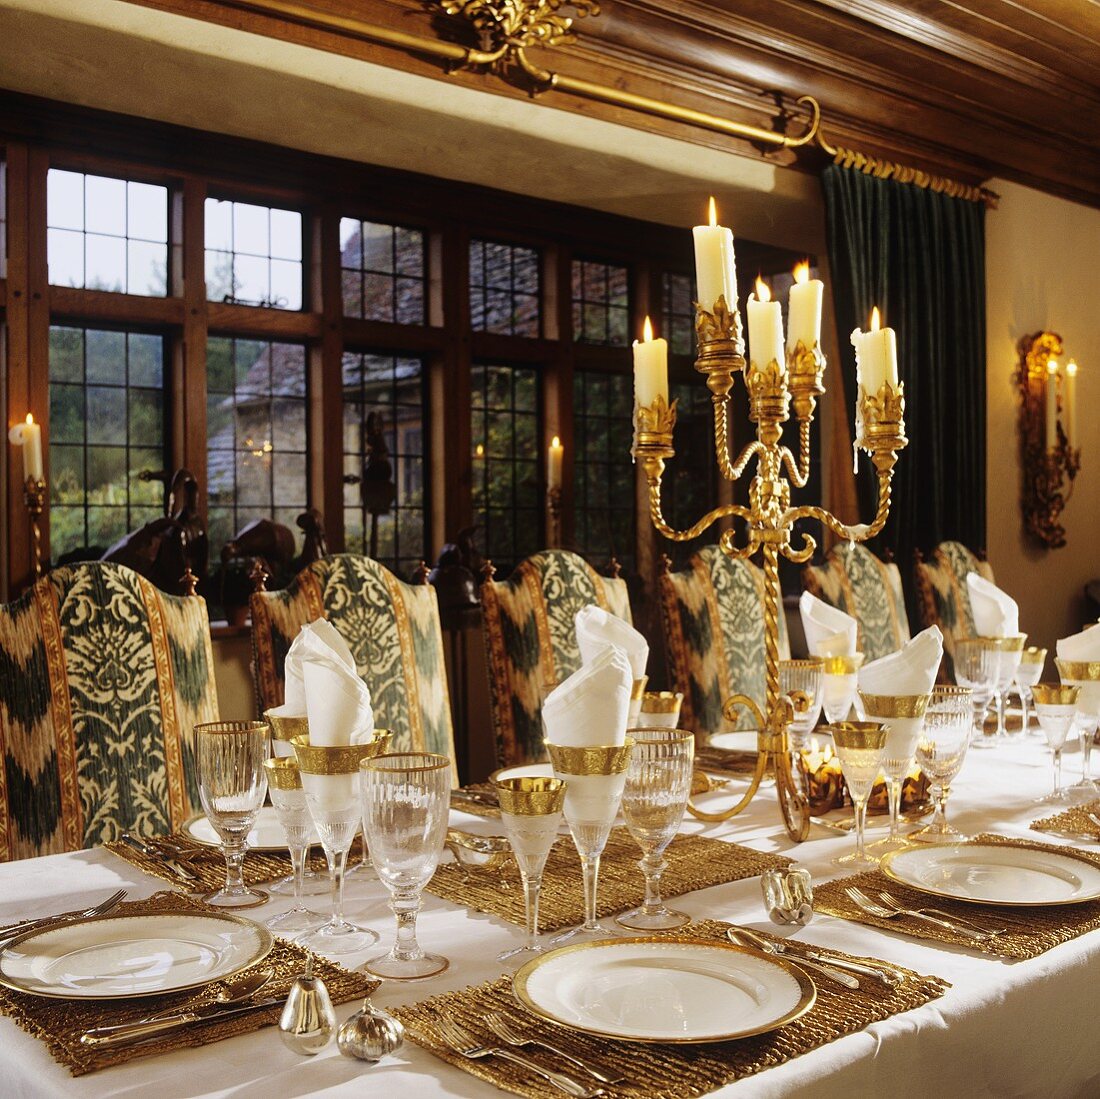 A festively laid table set with silver candle sticks in front of a window in the dining room of a country house